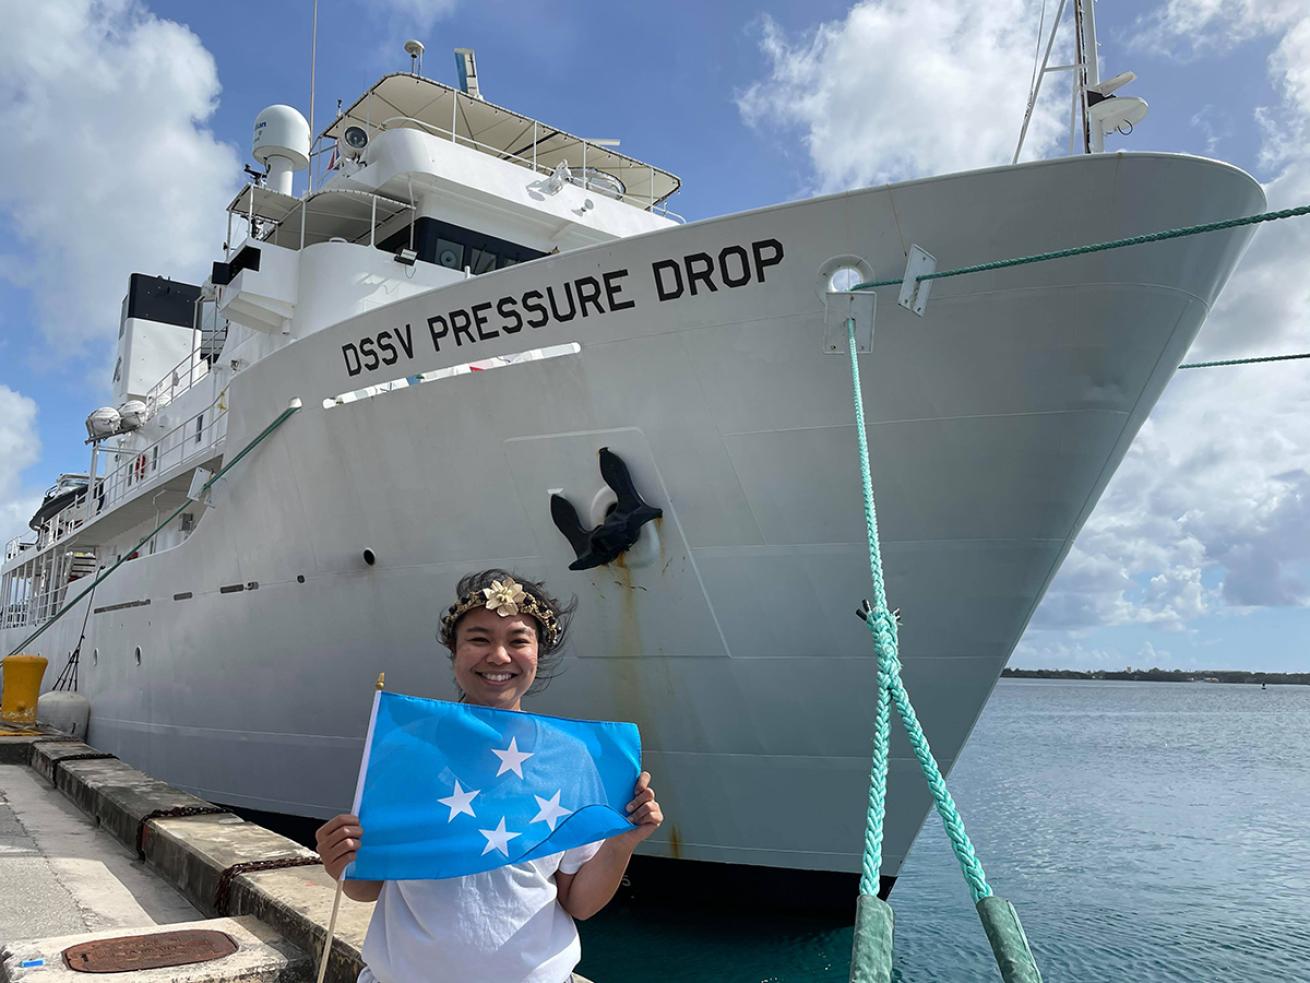 Nicole Yamase holds the Micronesian flag next to the DSSV Pressure Drop